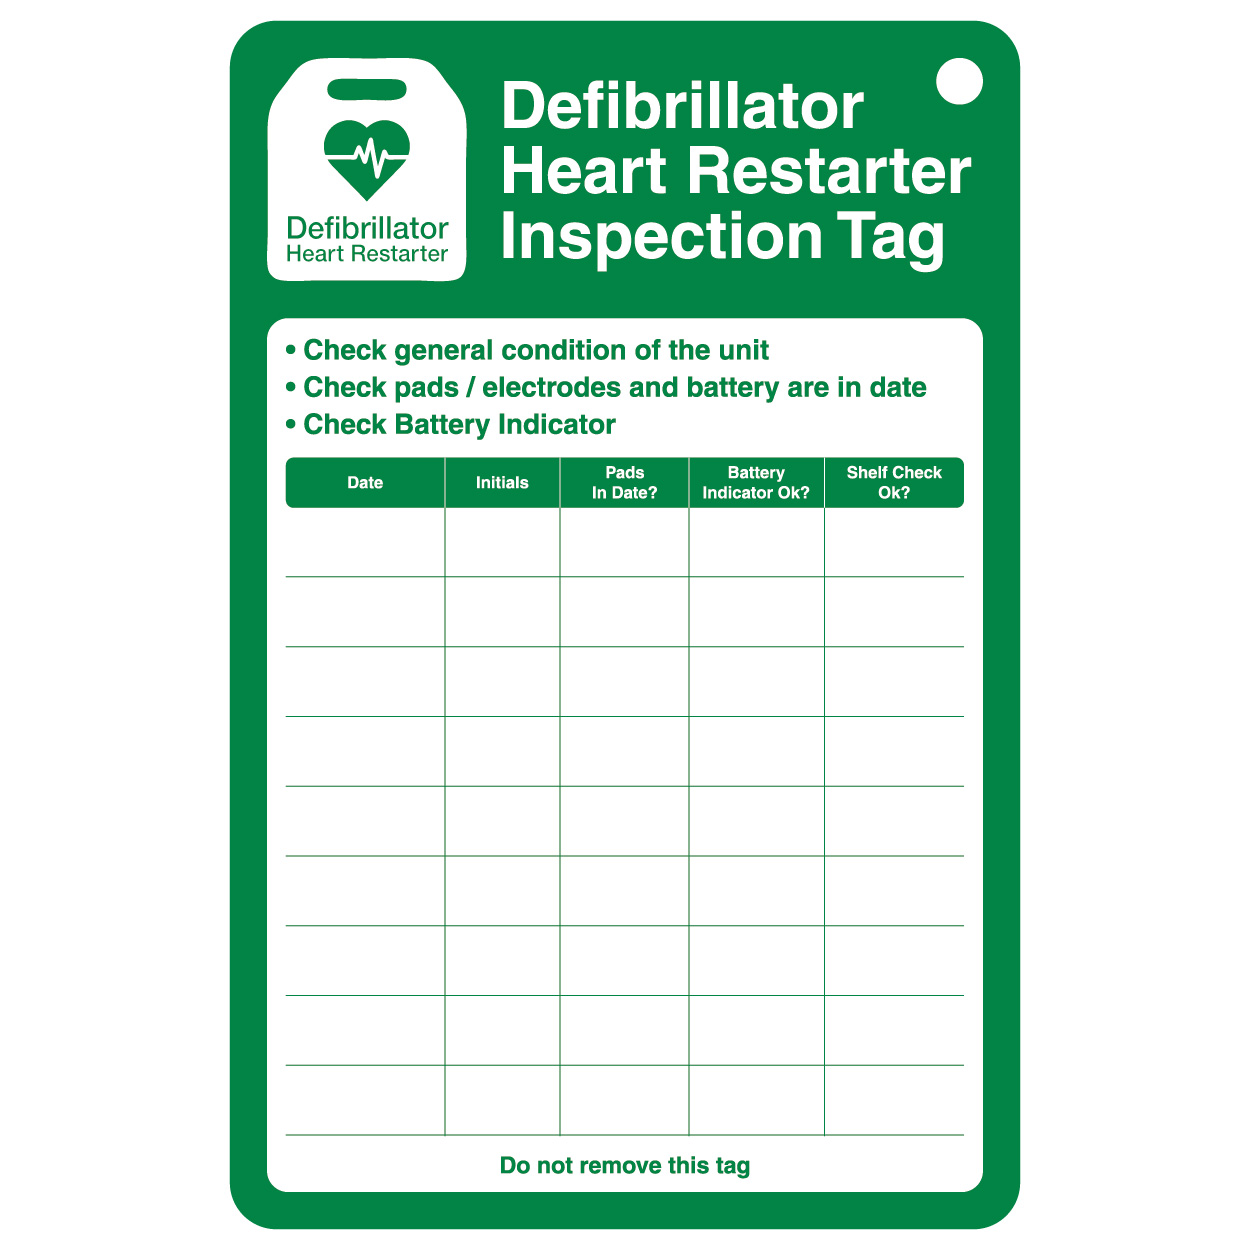 638156104037323846_defib-inspection-tag.png